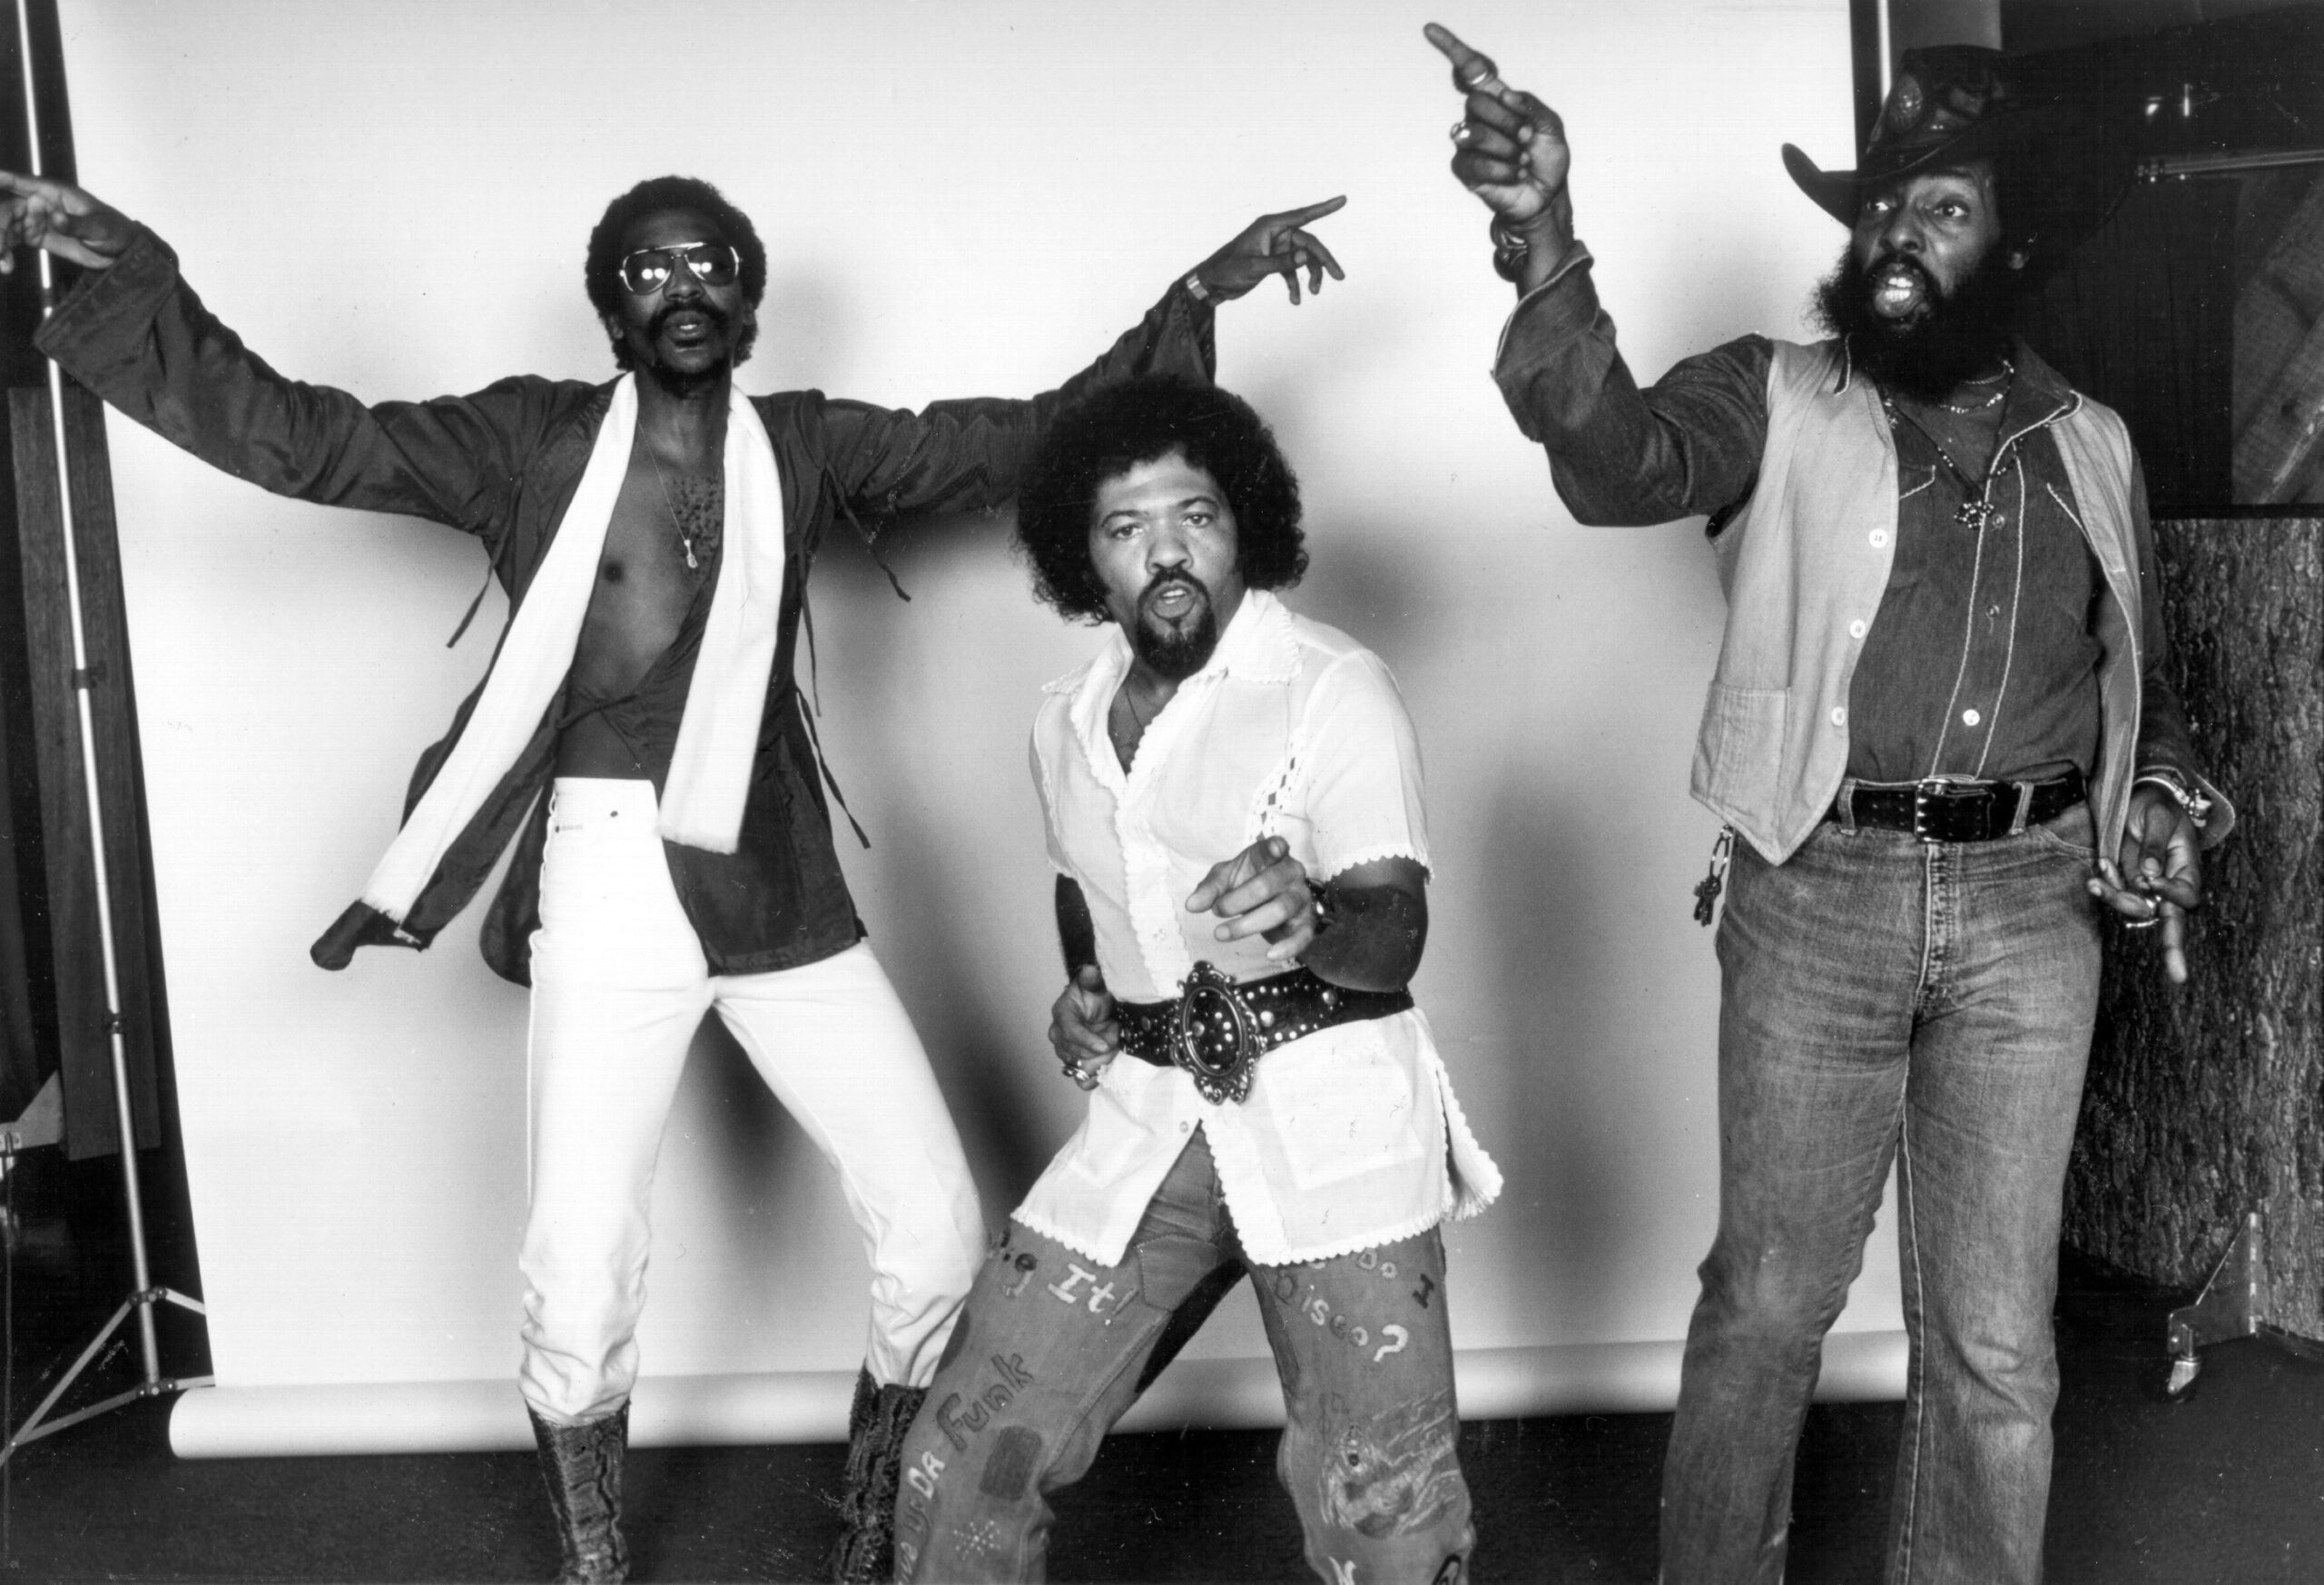 CIRCA 1977:  (L-R) Singers Calvin Simon, Fuzzy Haskins and Grady Thomas of the funk band Parliament-Funkadelic pose for a portrait in circa 1977. (Photo by Michael Ochs Archives/Getty Images)